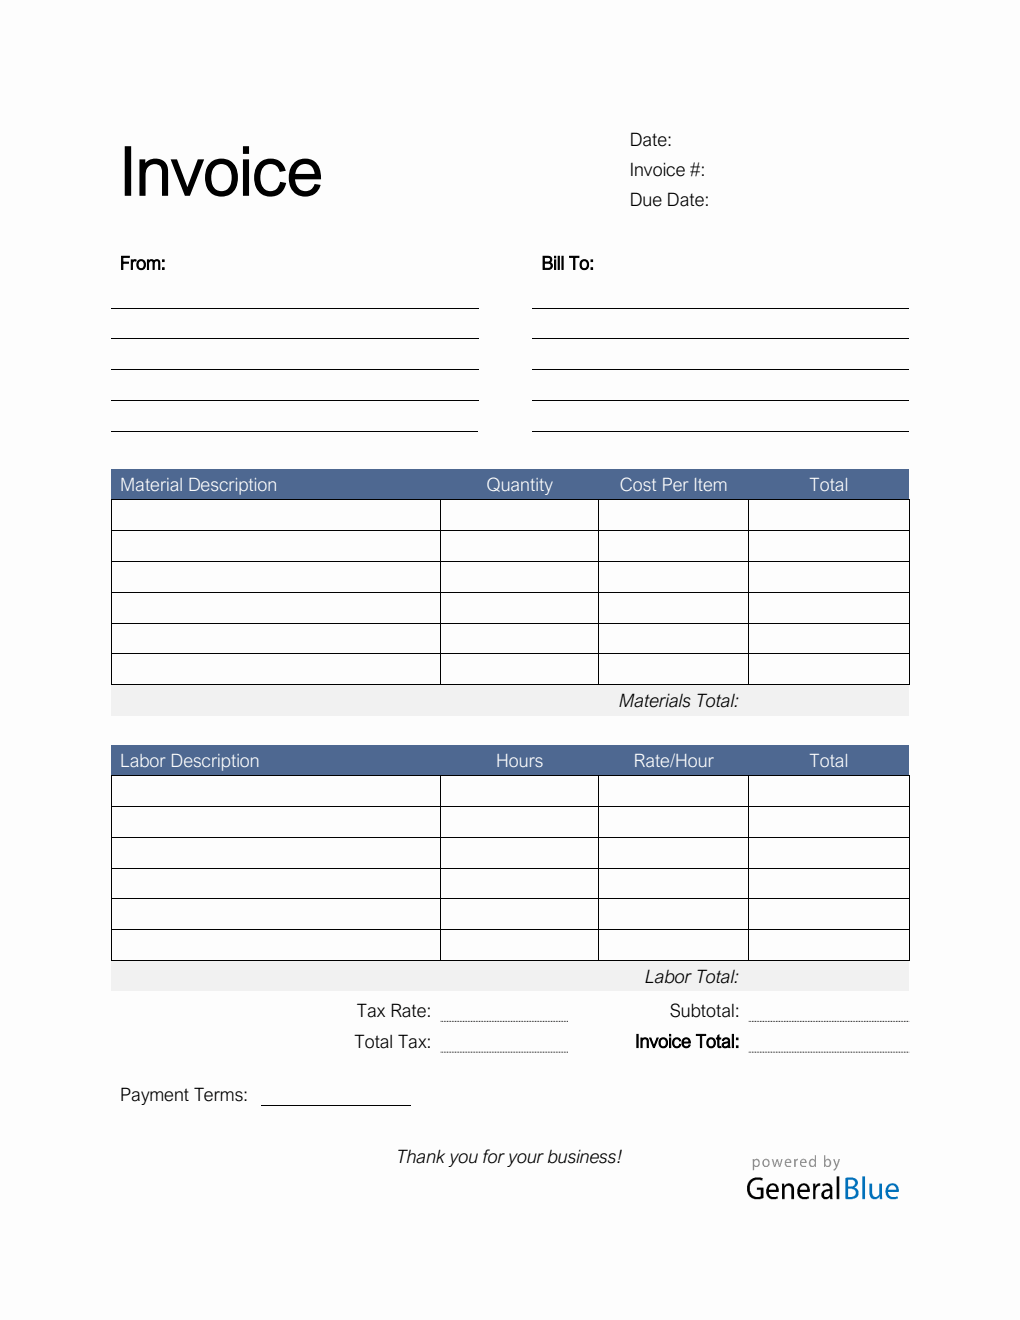 Time and Materials Invoice with Tax Calculation in PDF (Colorful)